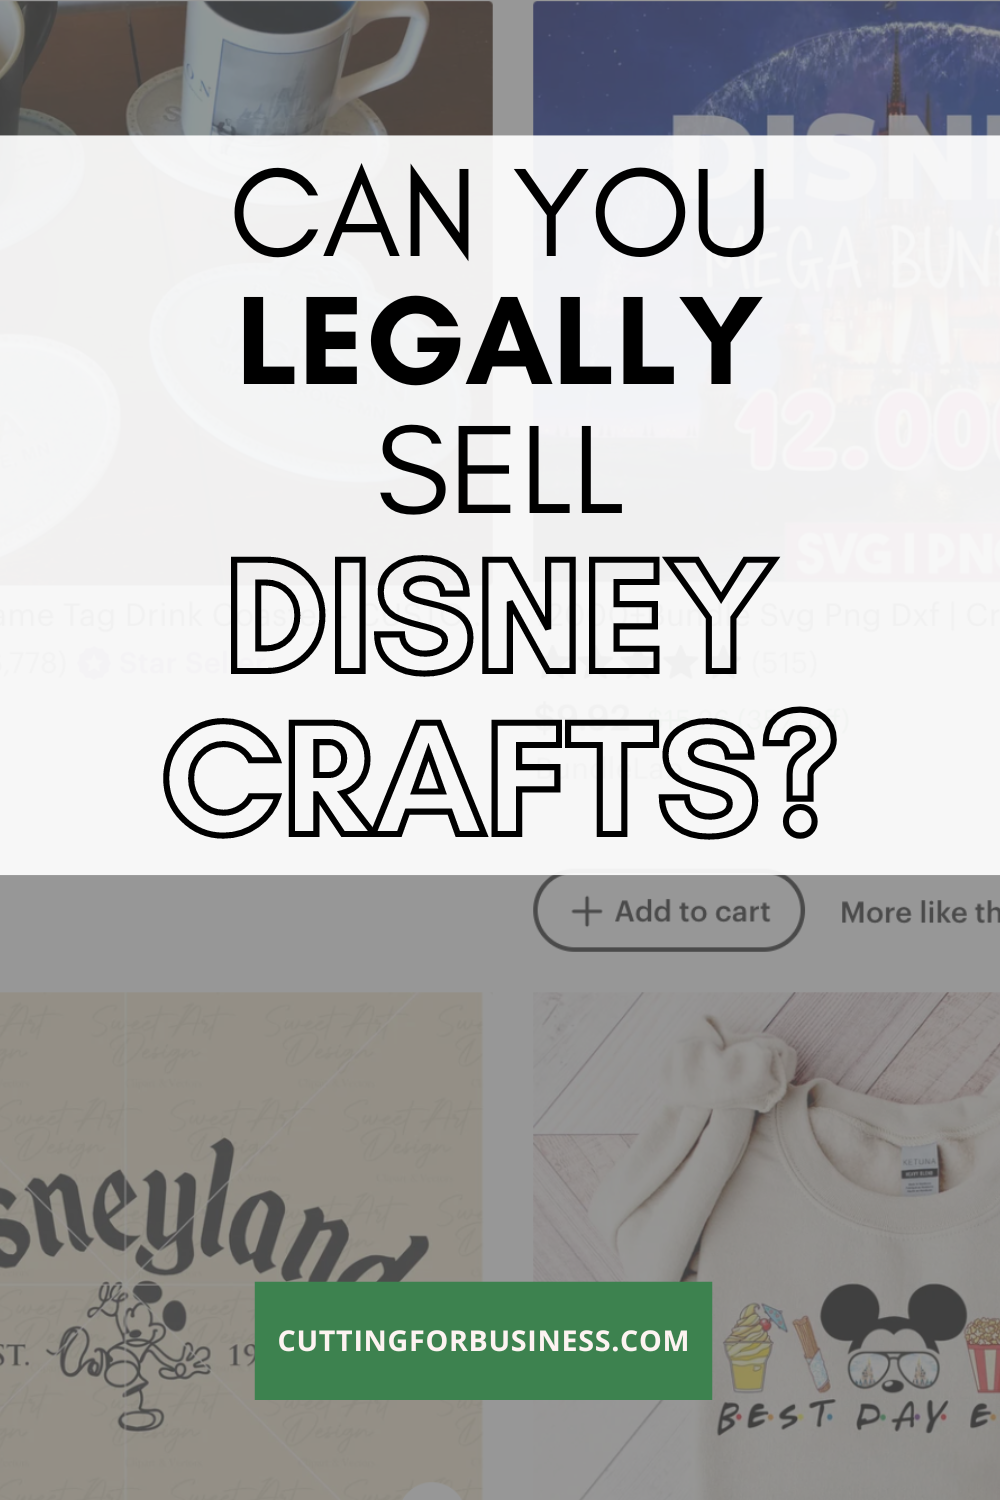 Can You Legally Sell Disney Crafts? - cuttingforbusiness.com.